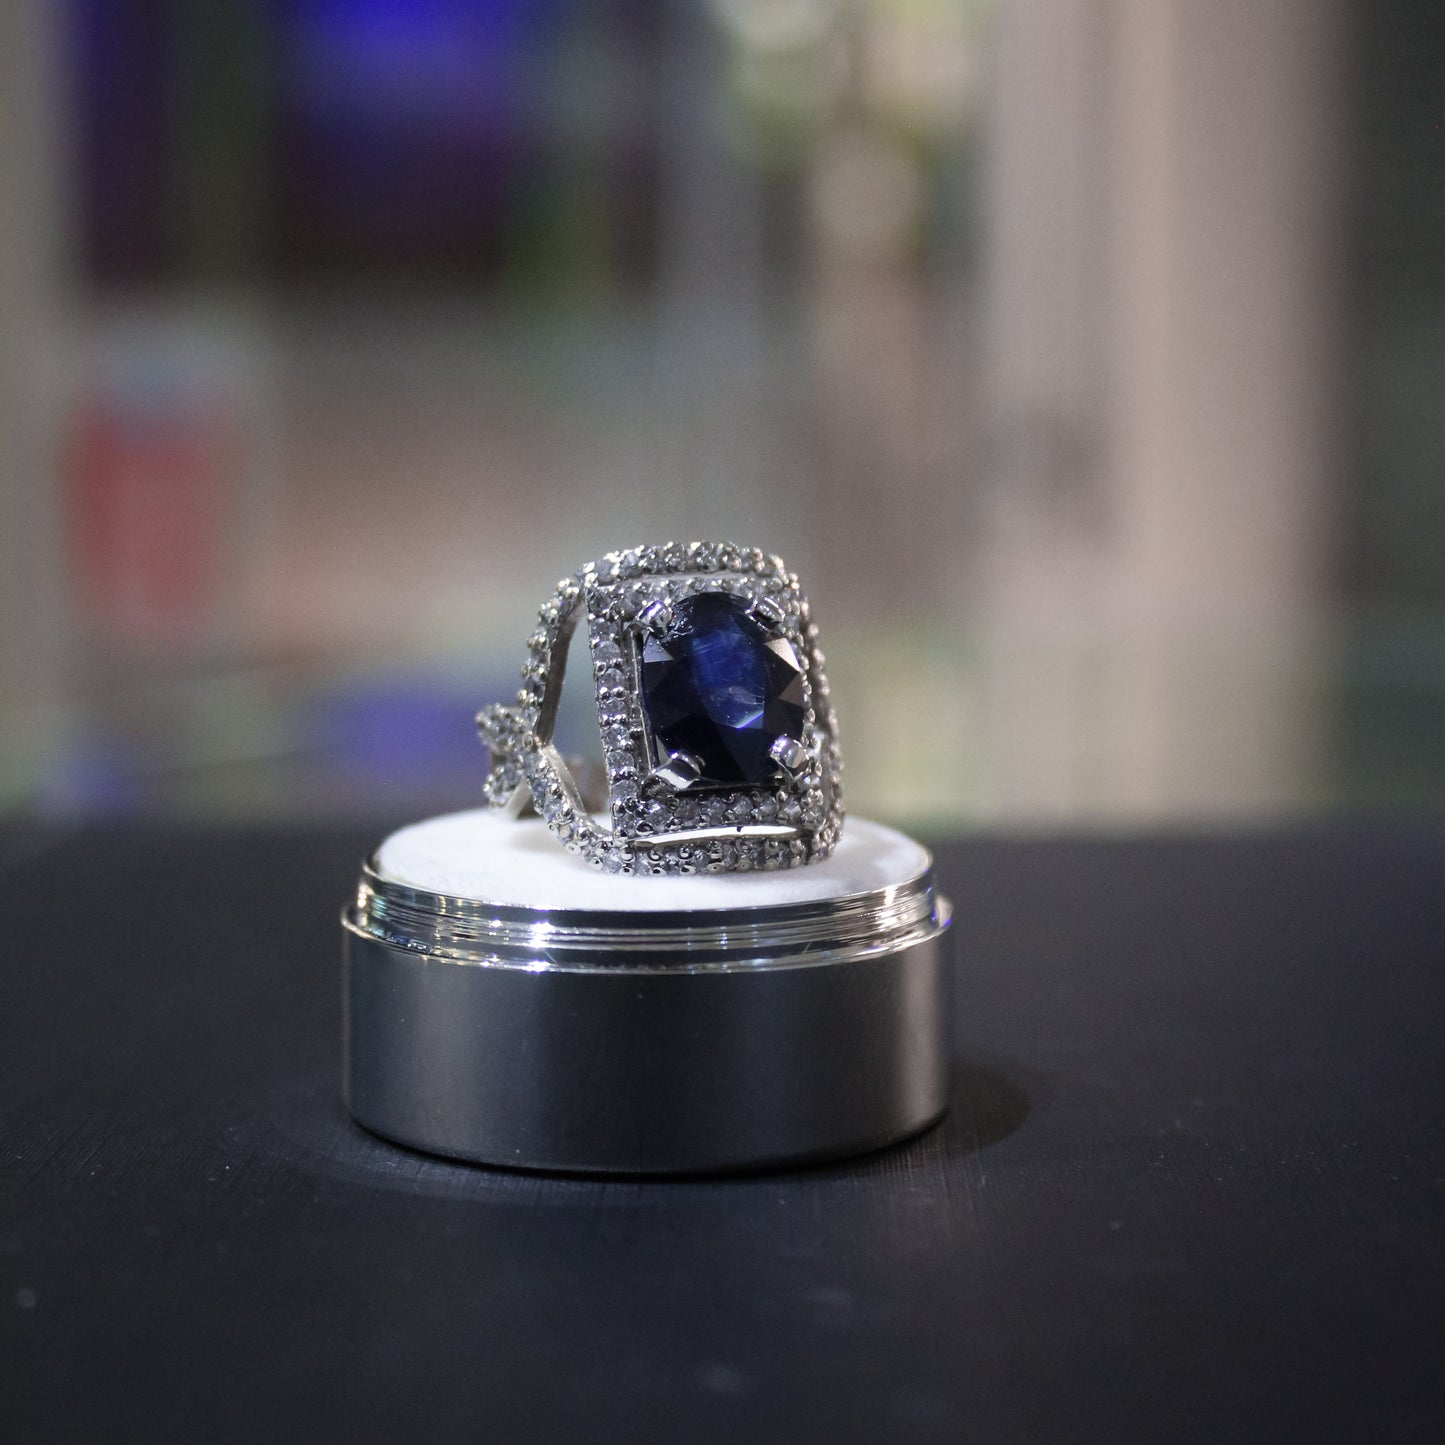 Buy 7-Carats Blue Sapphire in 925 Pure Silver Women's Ring